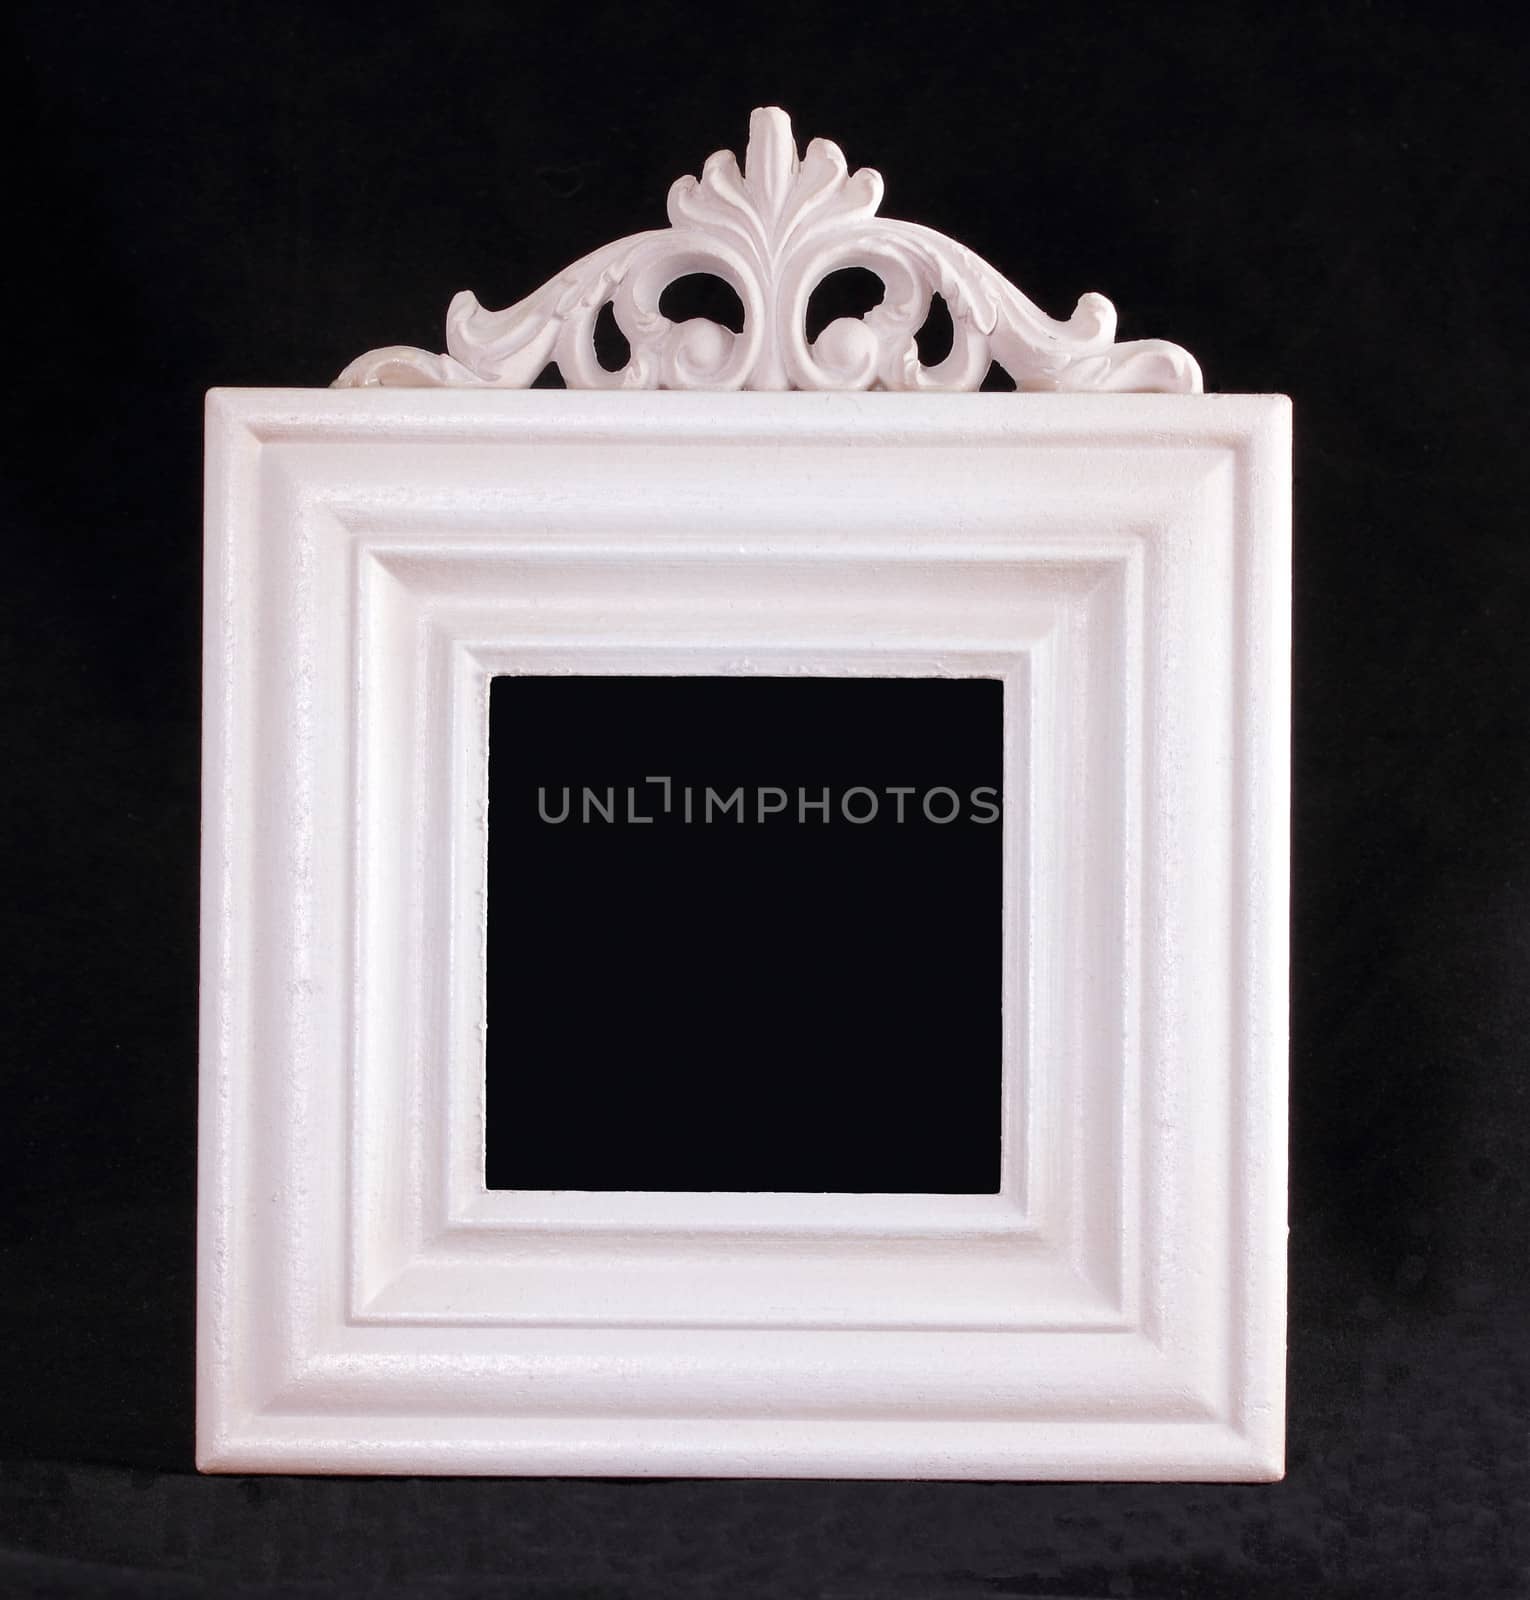 The carved frame for pictures or photos